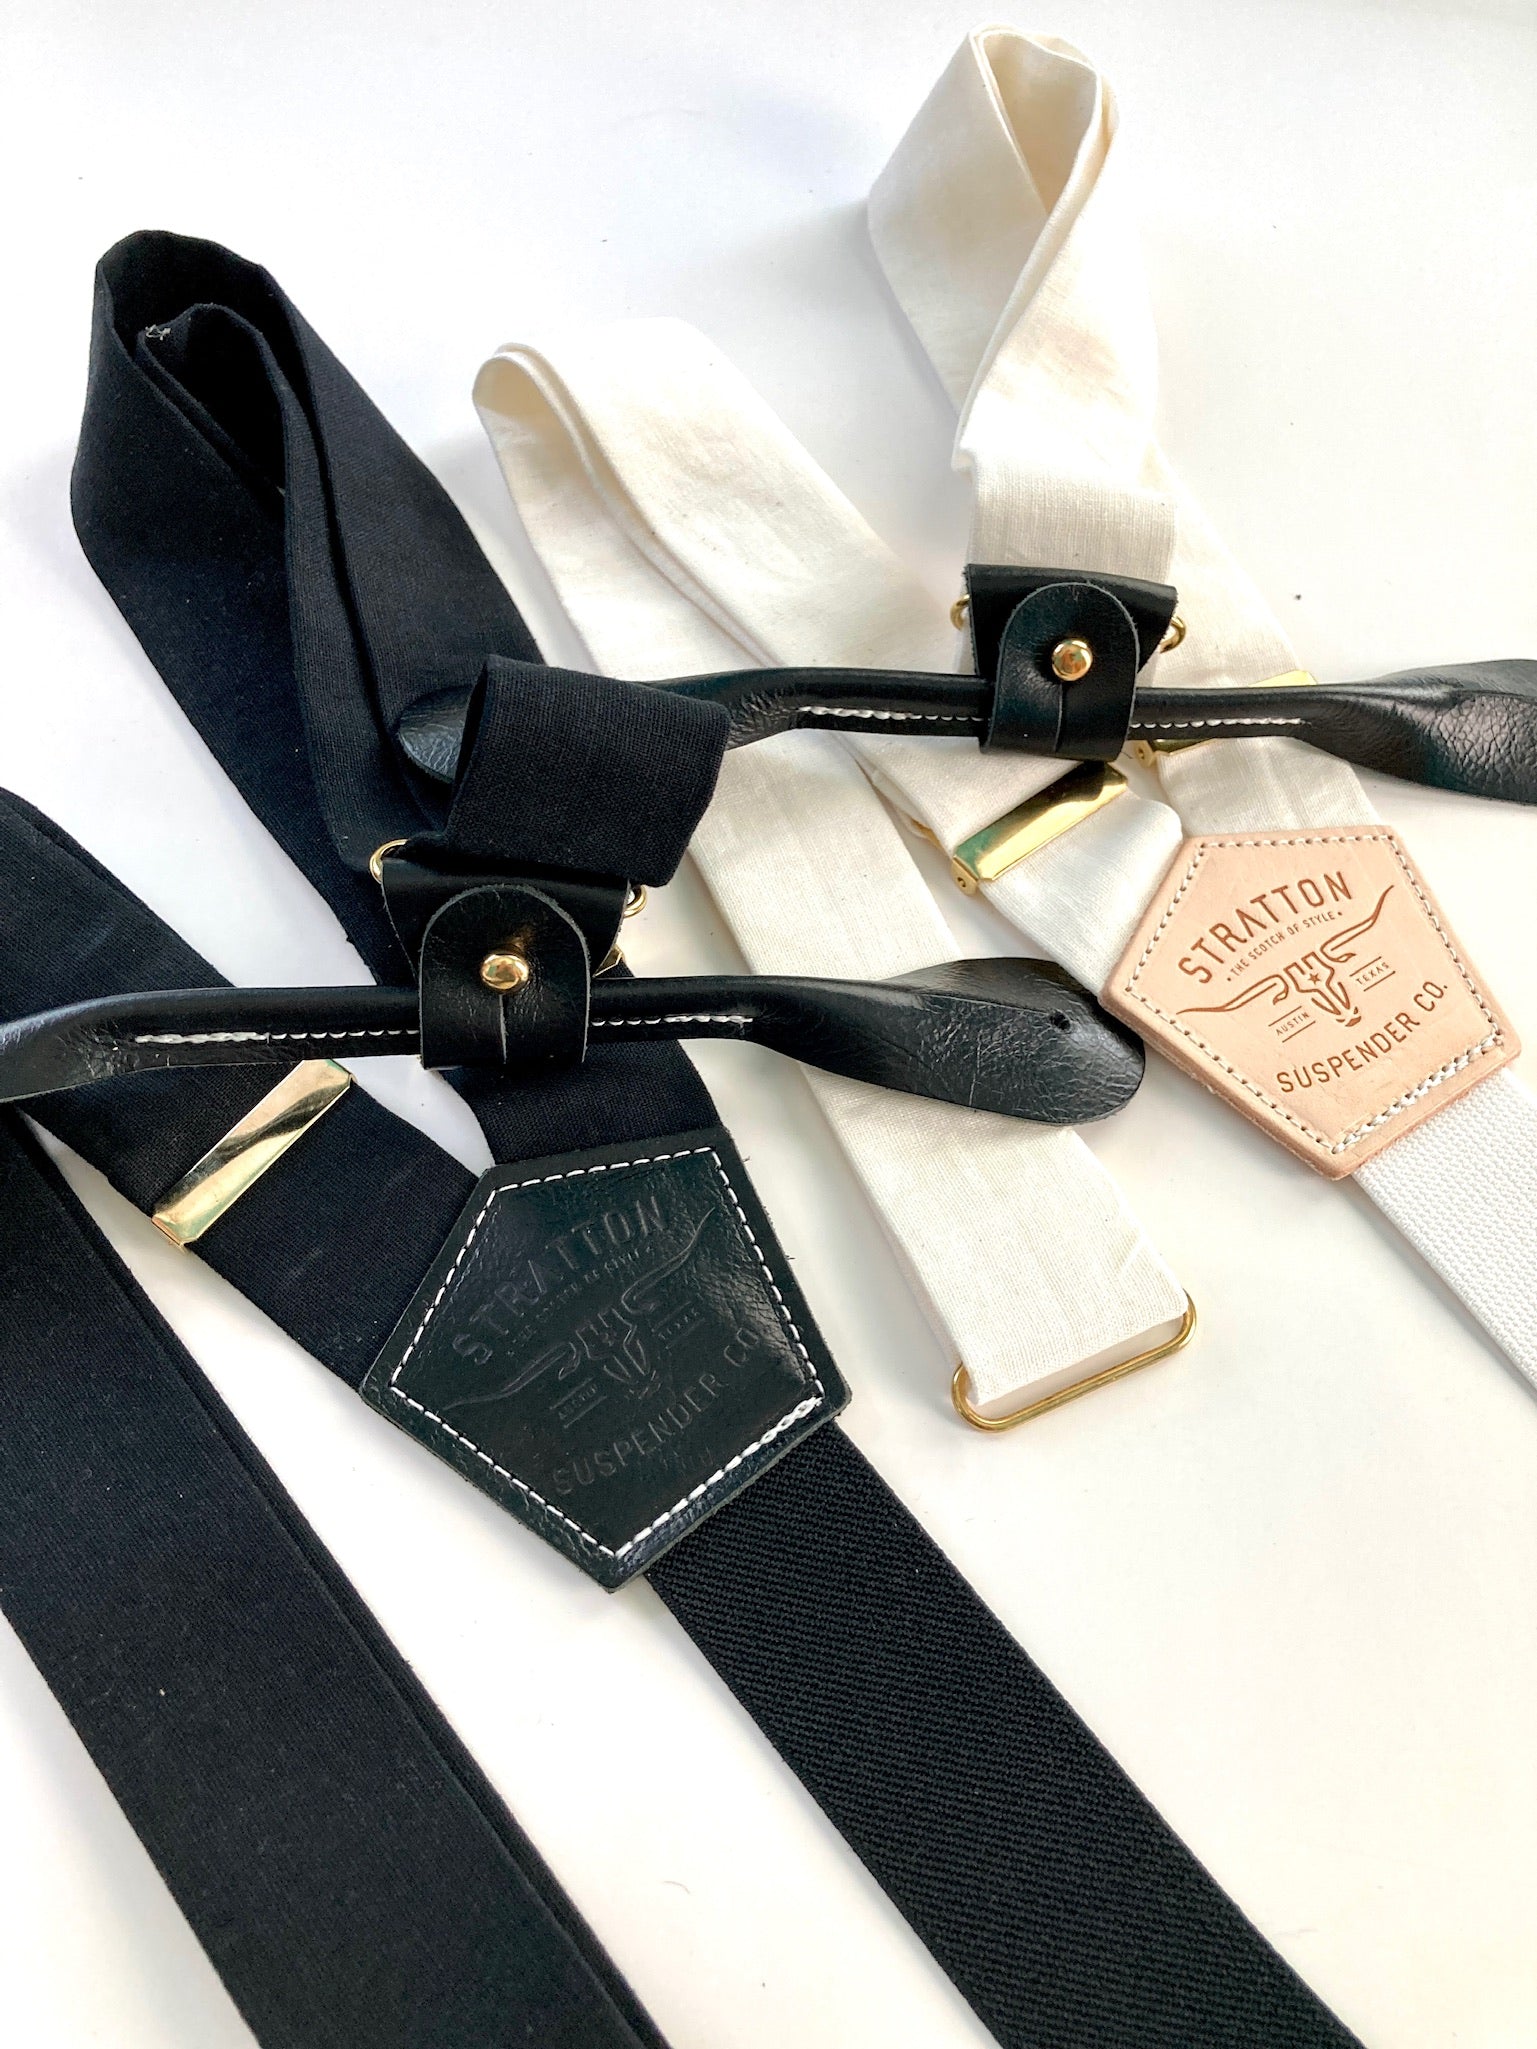 White and Black Tuxedo with Gold - Black Tie Suspenders / Braces with –  Stratton Suspender Co.